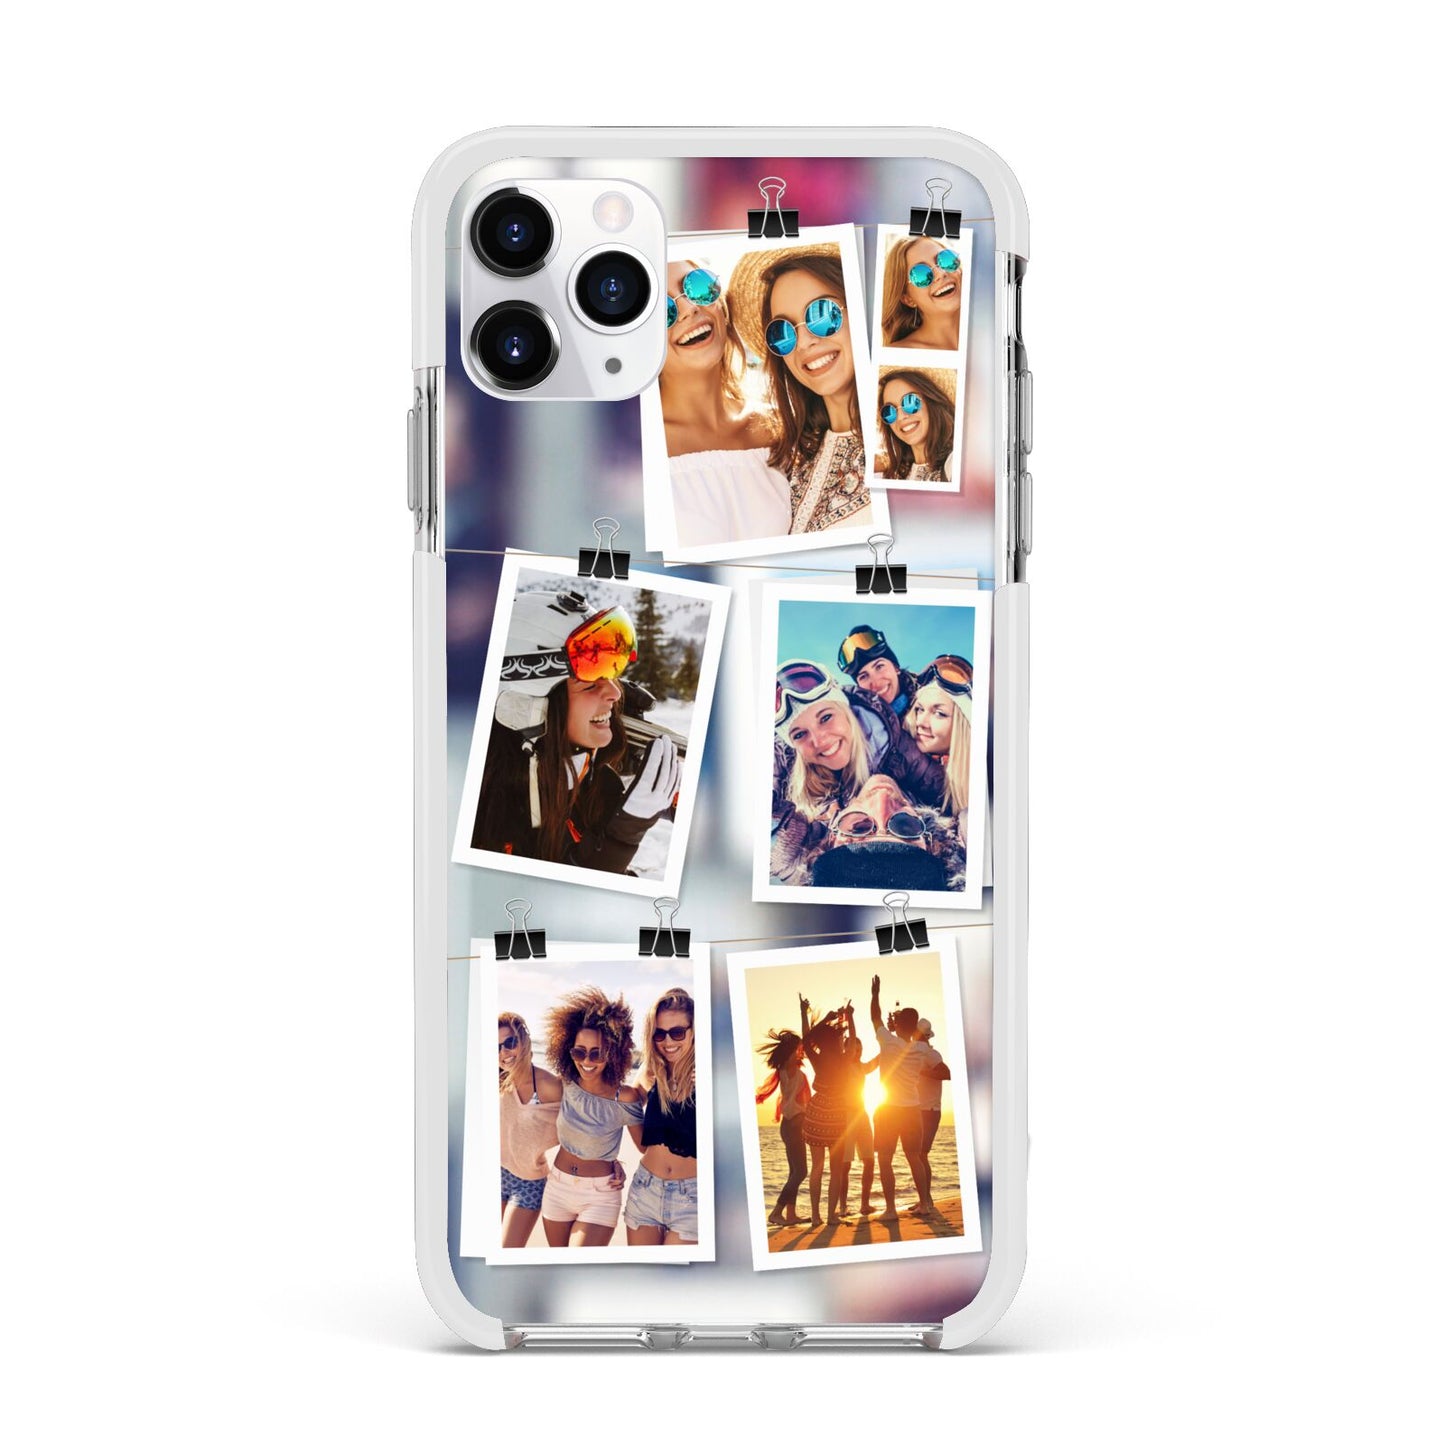 Photo Wall Montage Upload Apple iPhone 11 Pro Max in Silver with White Impact Case